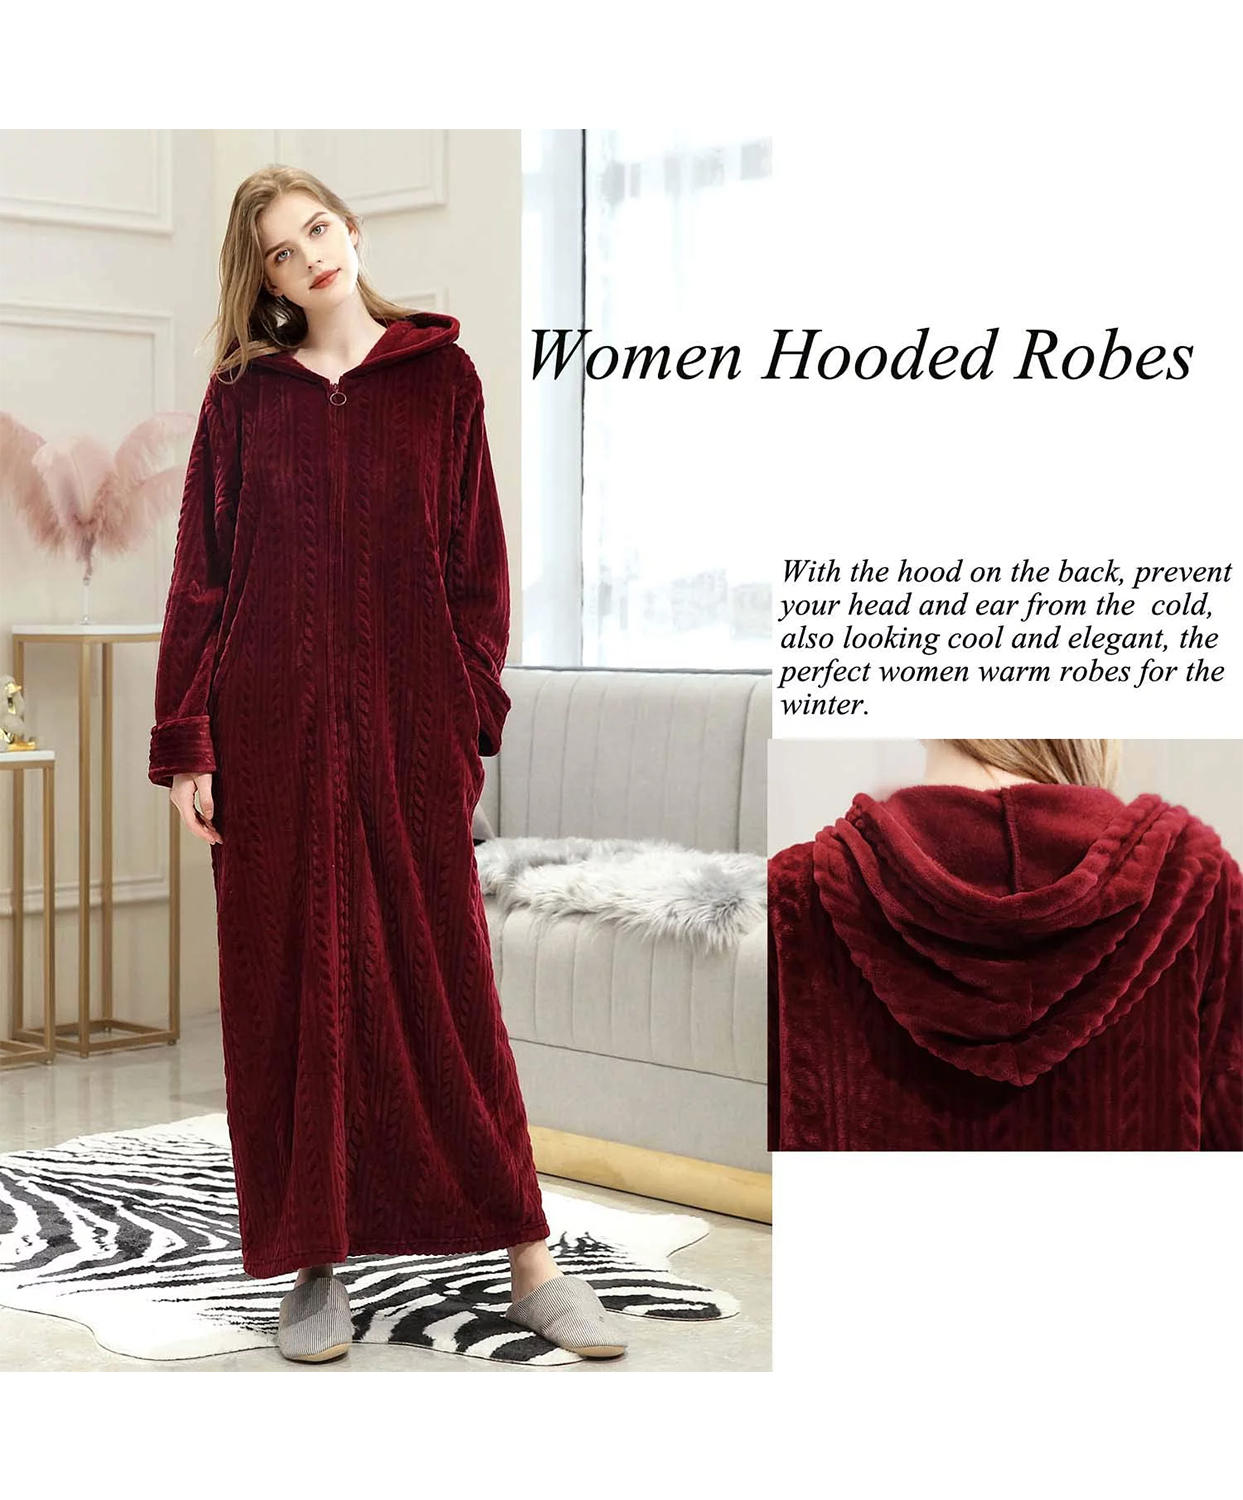 LOFIR Womens Hooded Plush Robe, Zip up Front Soft Fleece Robes for Women (L/XL, Wine Red) - image 4 of 8